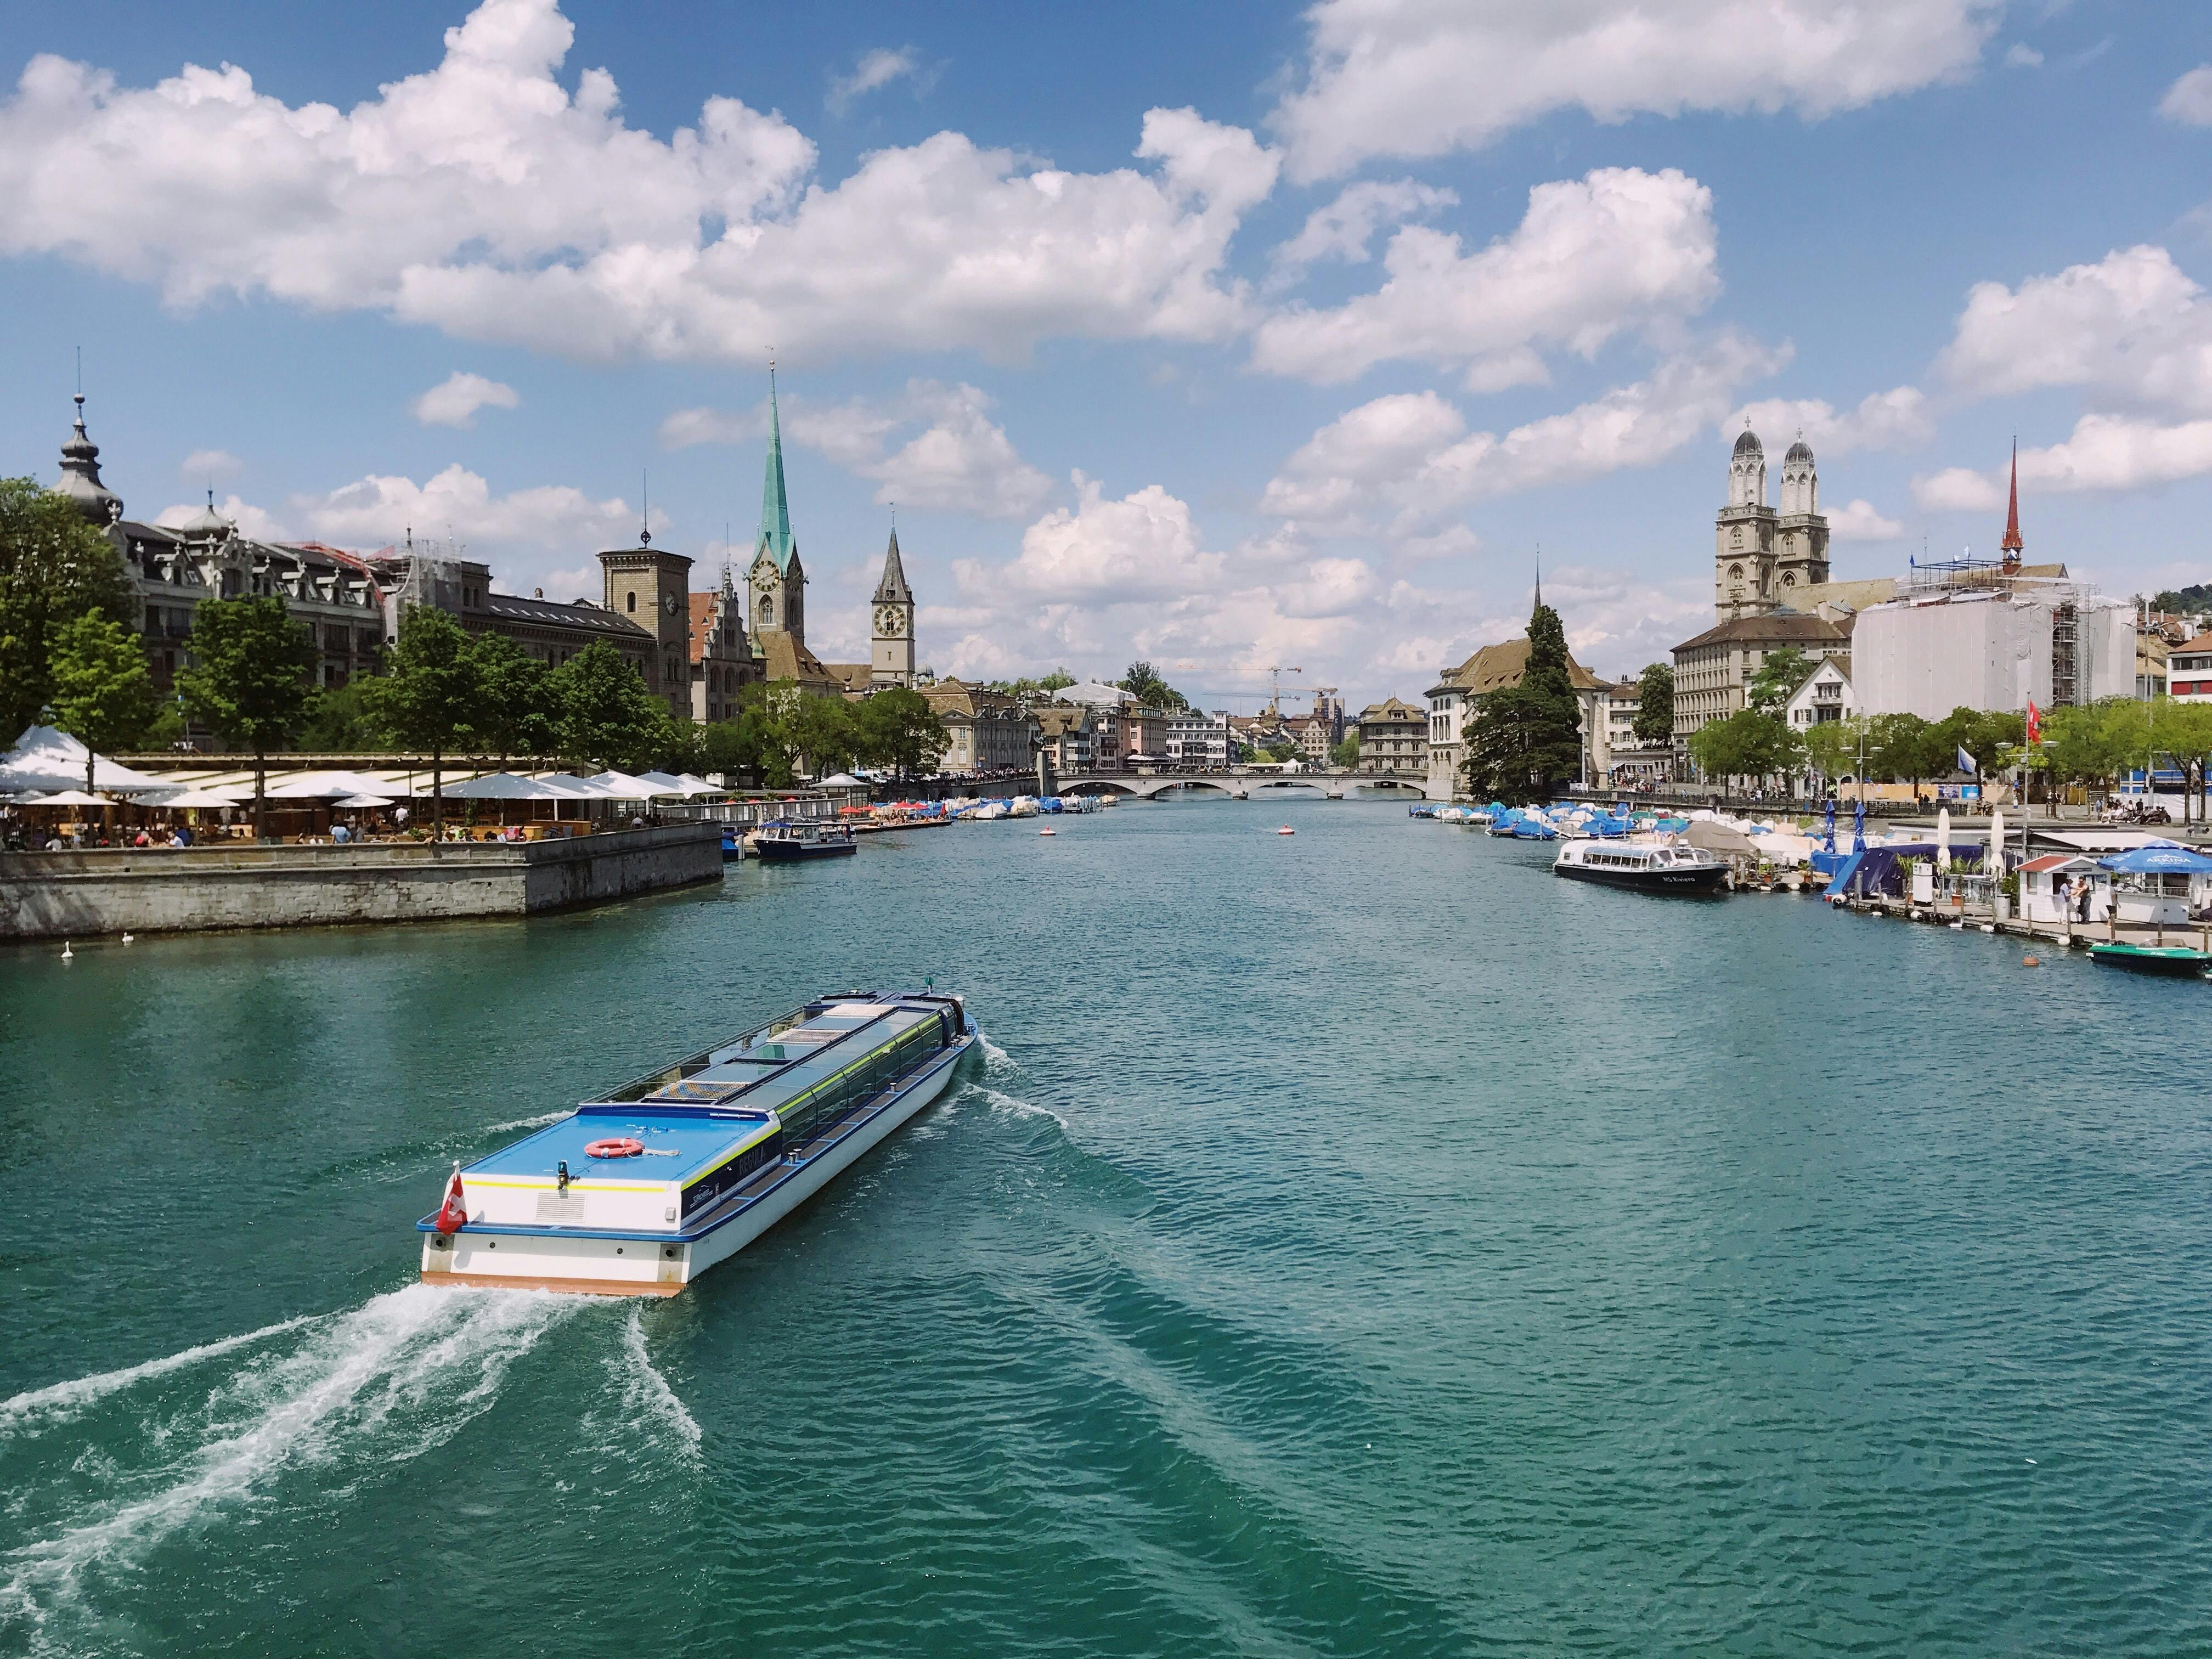 Explore the Instaworthy spots of Zurich with a local